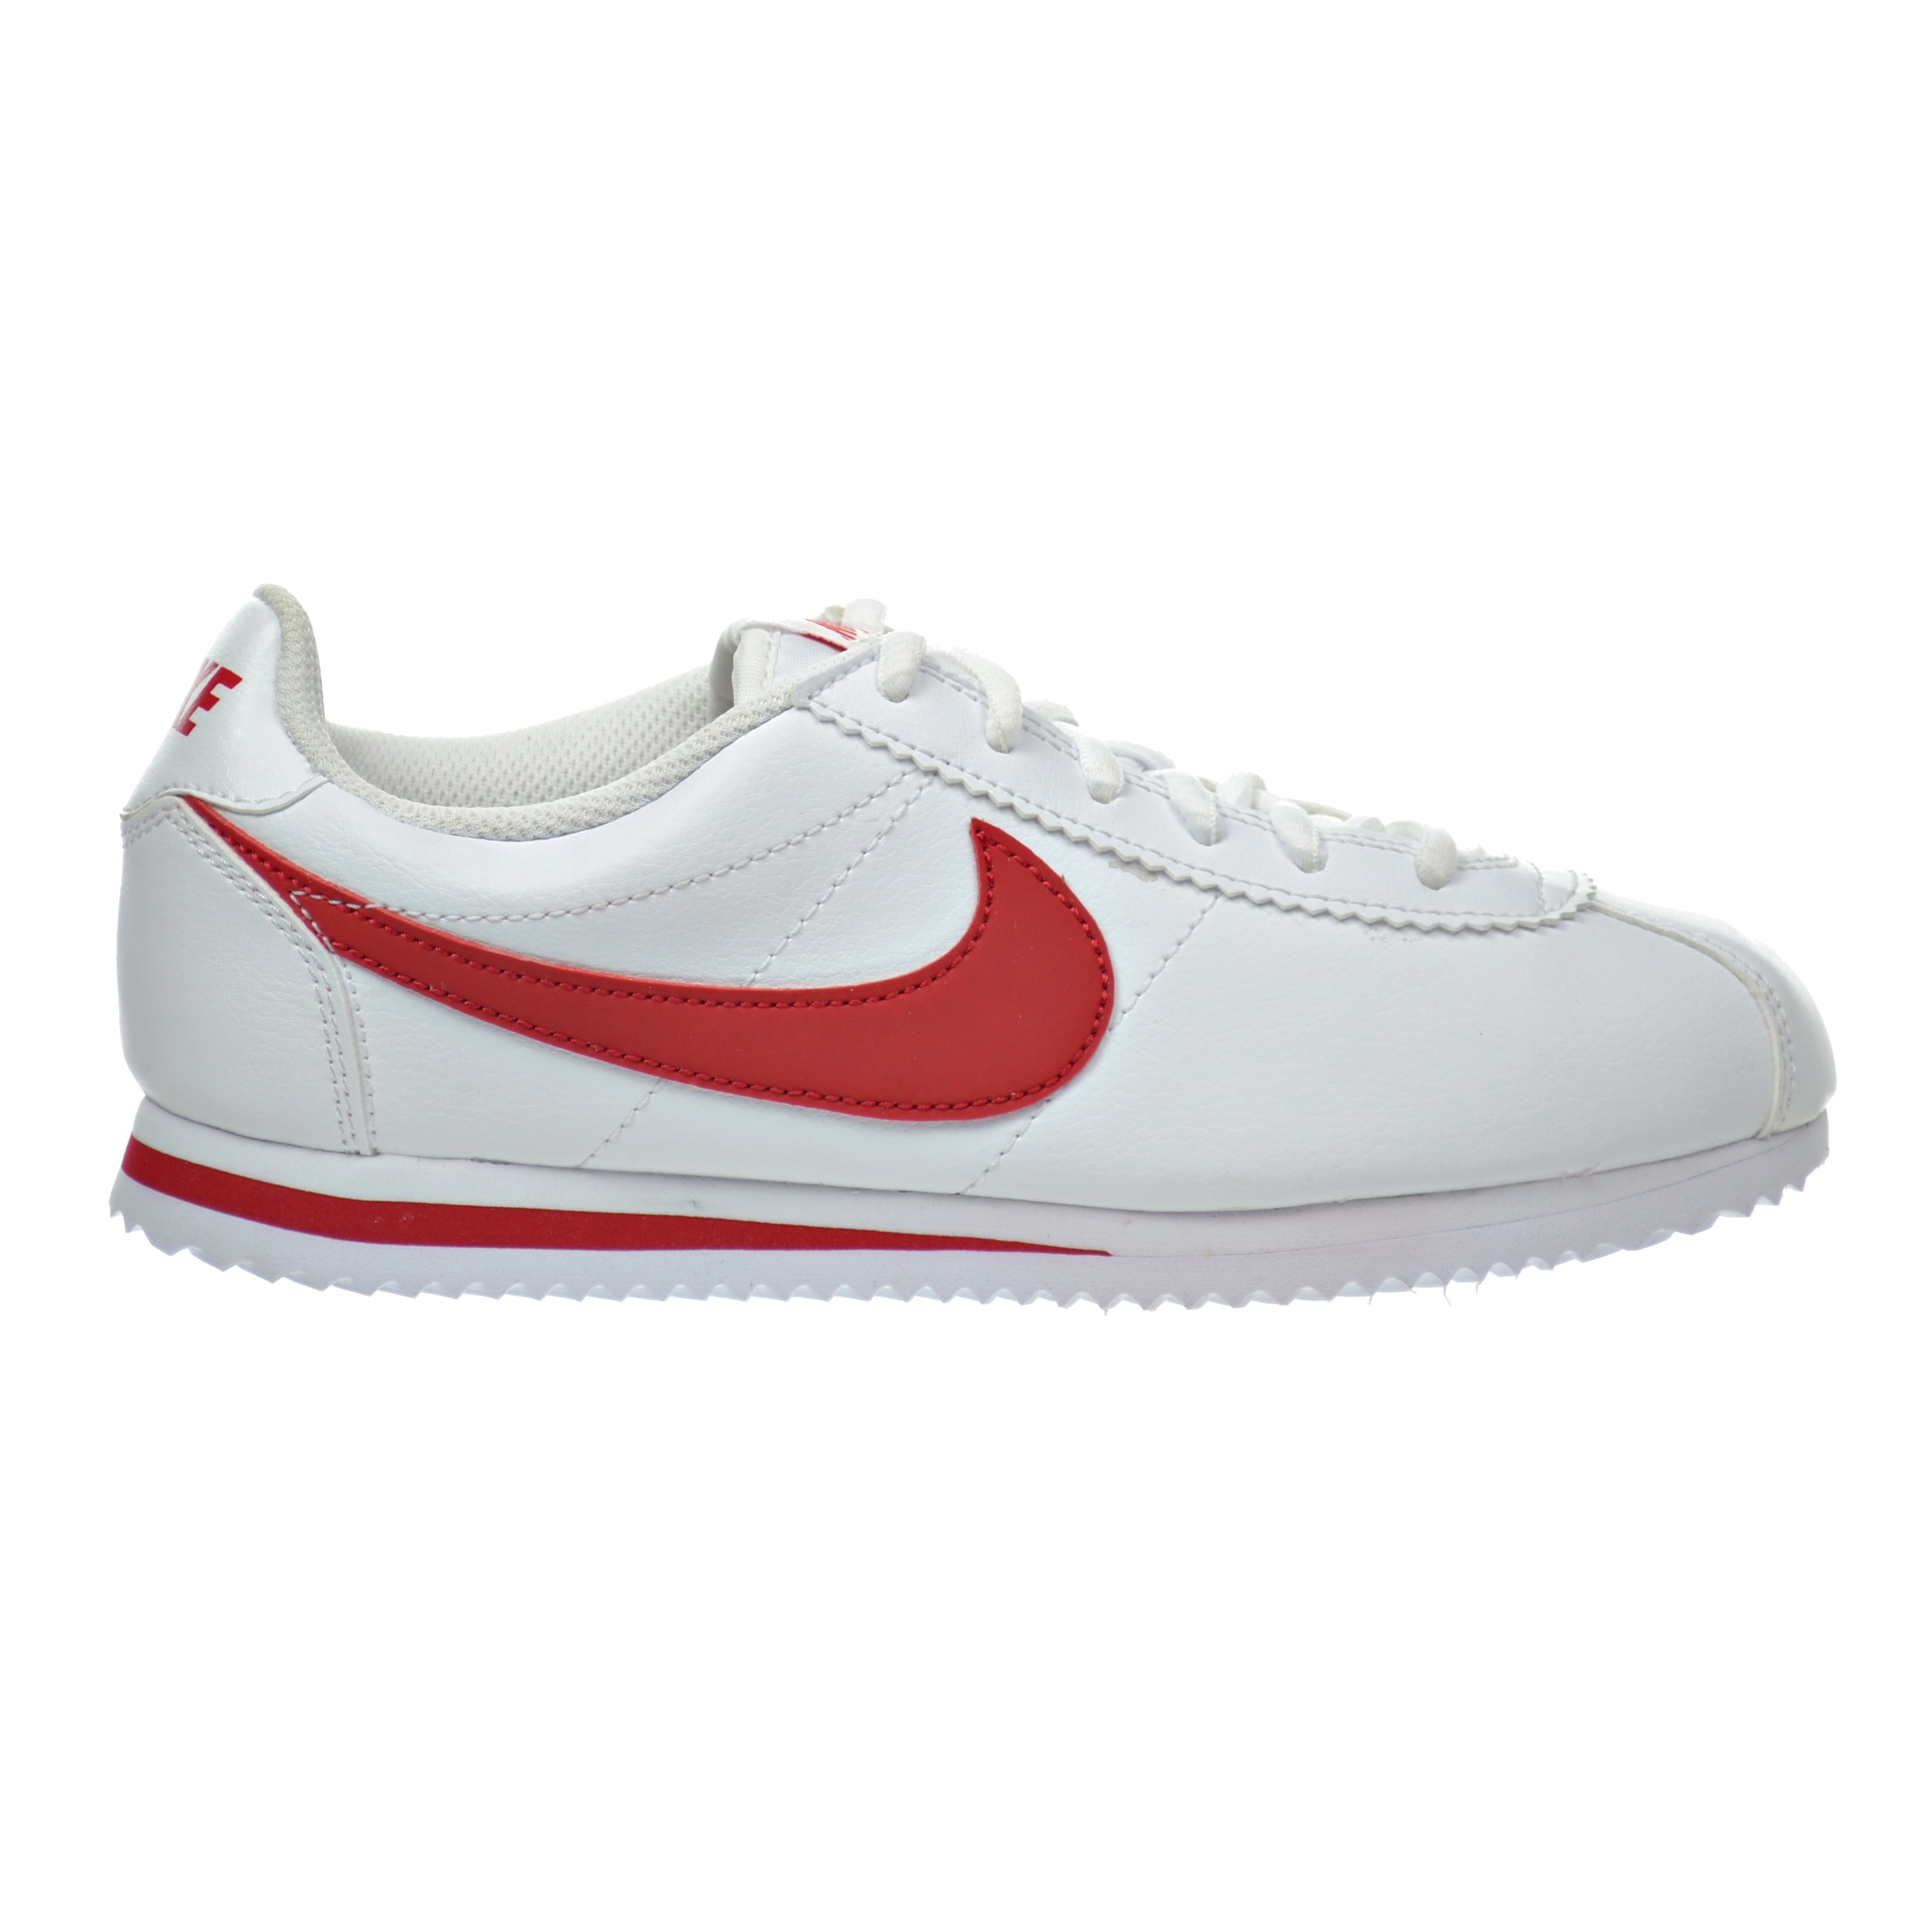 Nike Cortez (GS) Kid's Shoes White/University Red